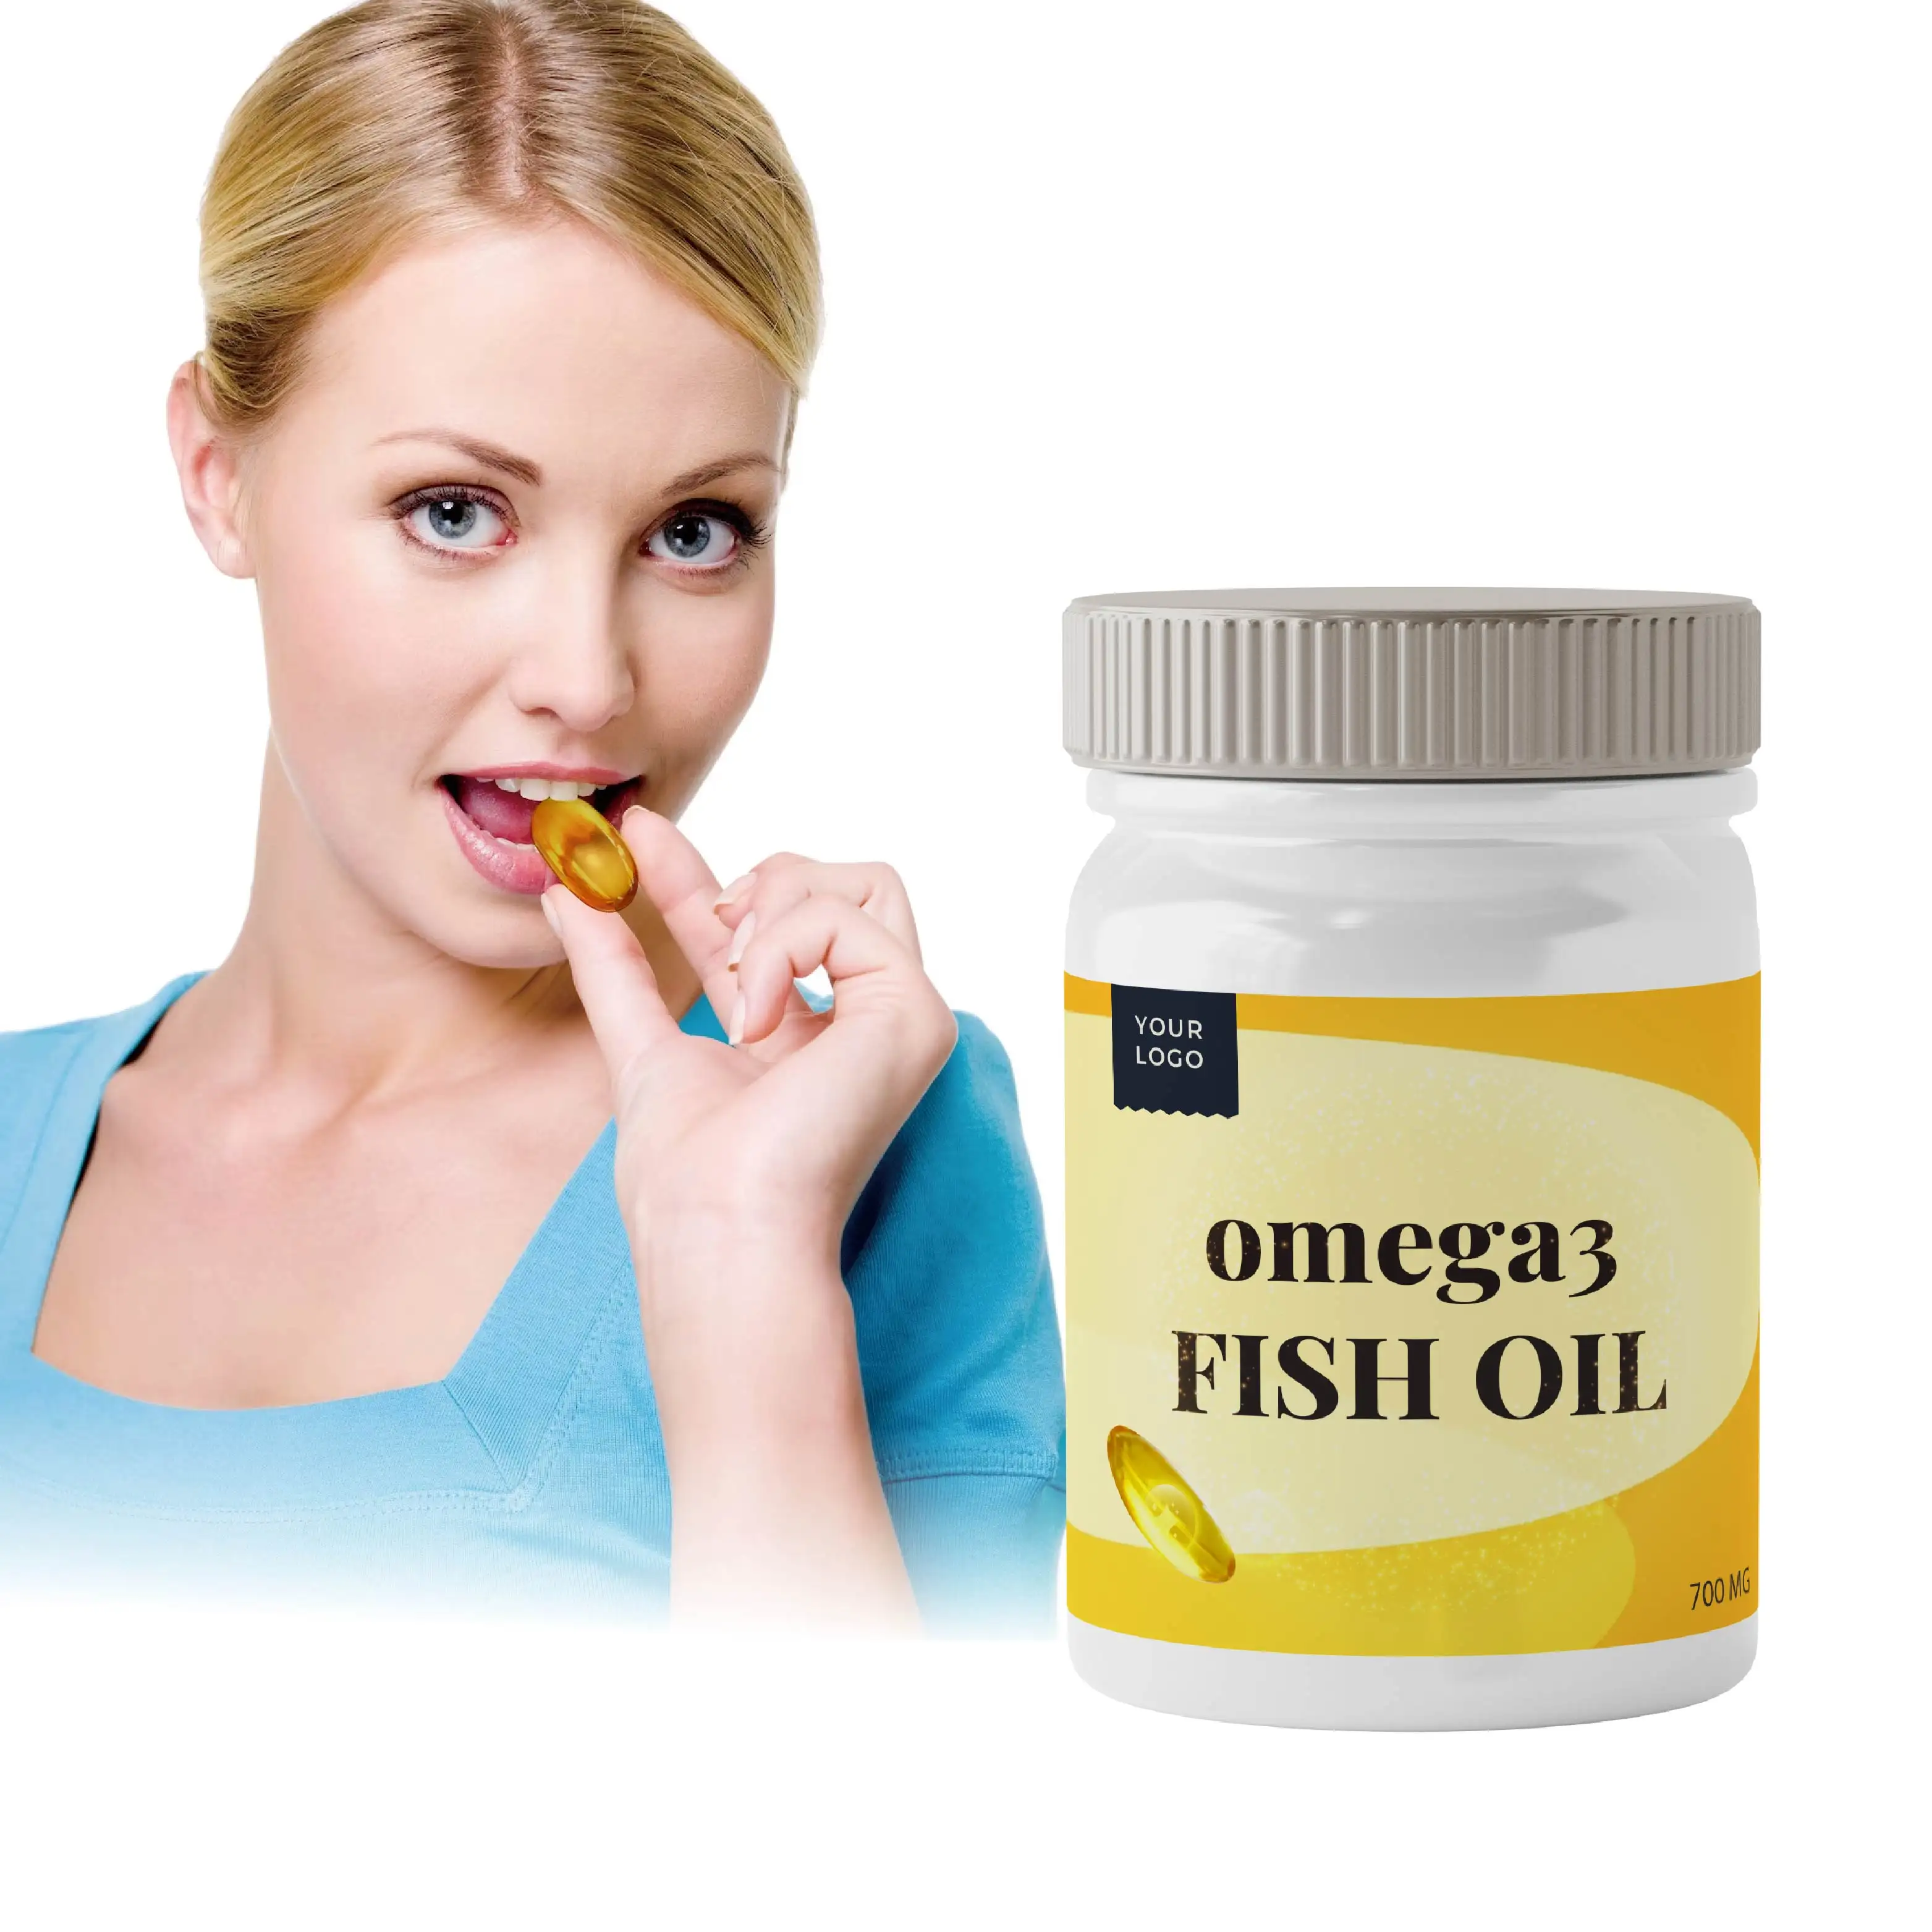 High Quality Private Label Triple Strength Omega 3 Fish Oil Supplements Deep Sea Fish Wild Caught from Norwegian Waters